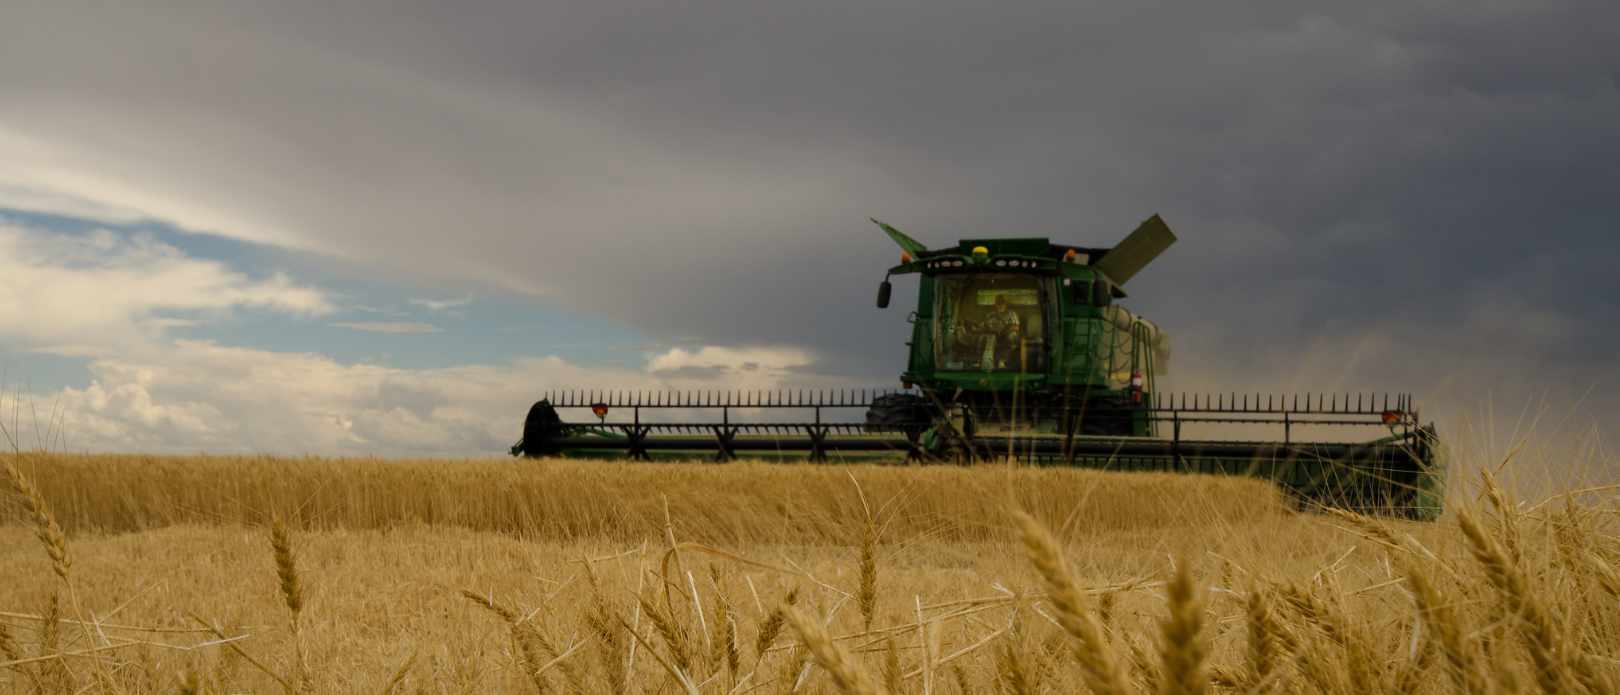 A green combine harvester on a field under dark clouds